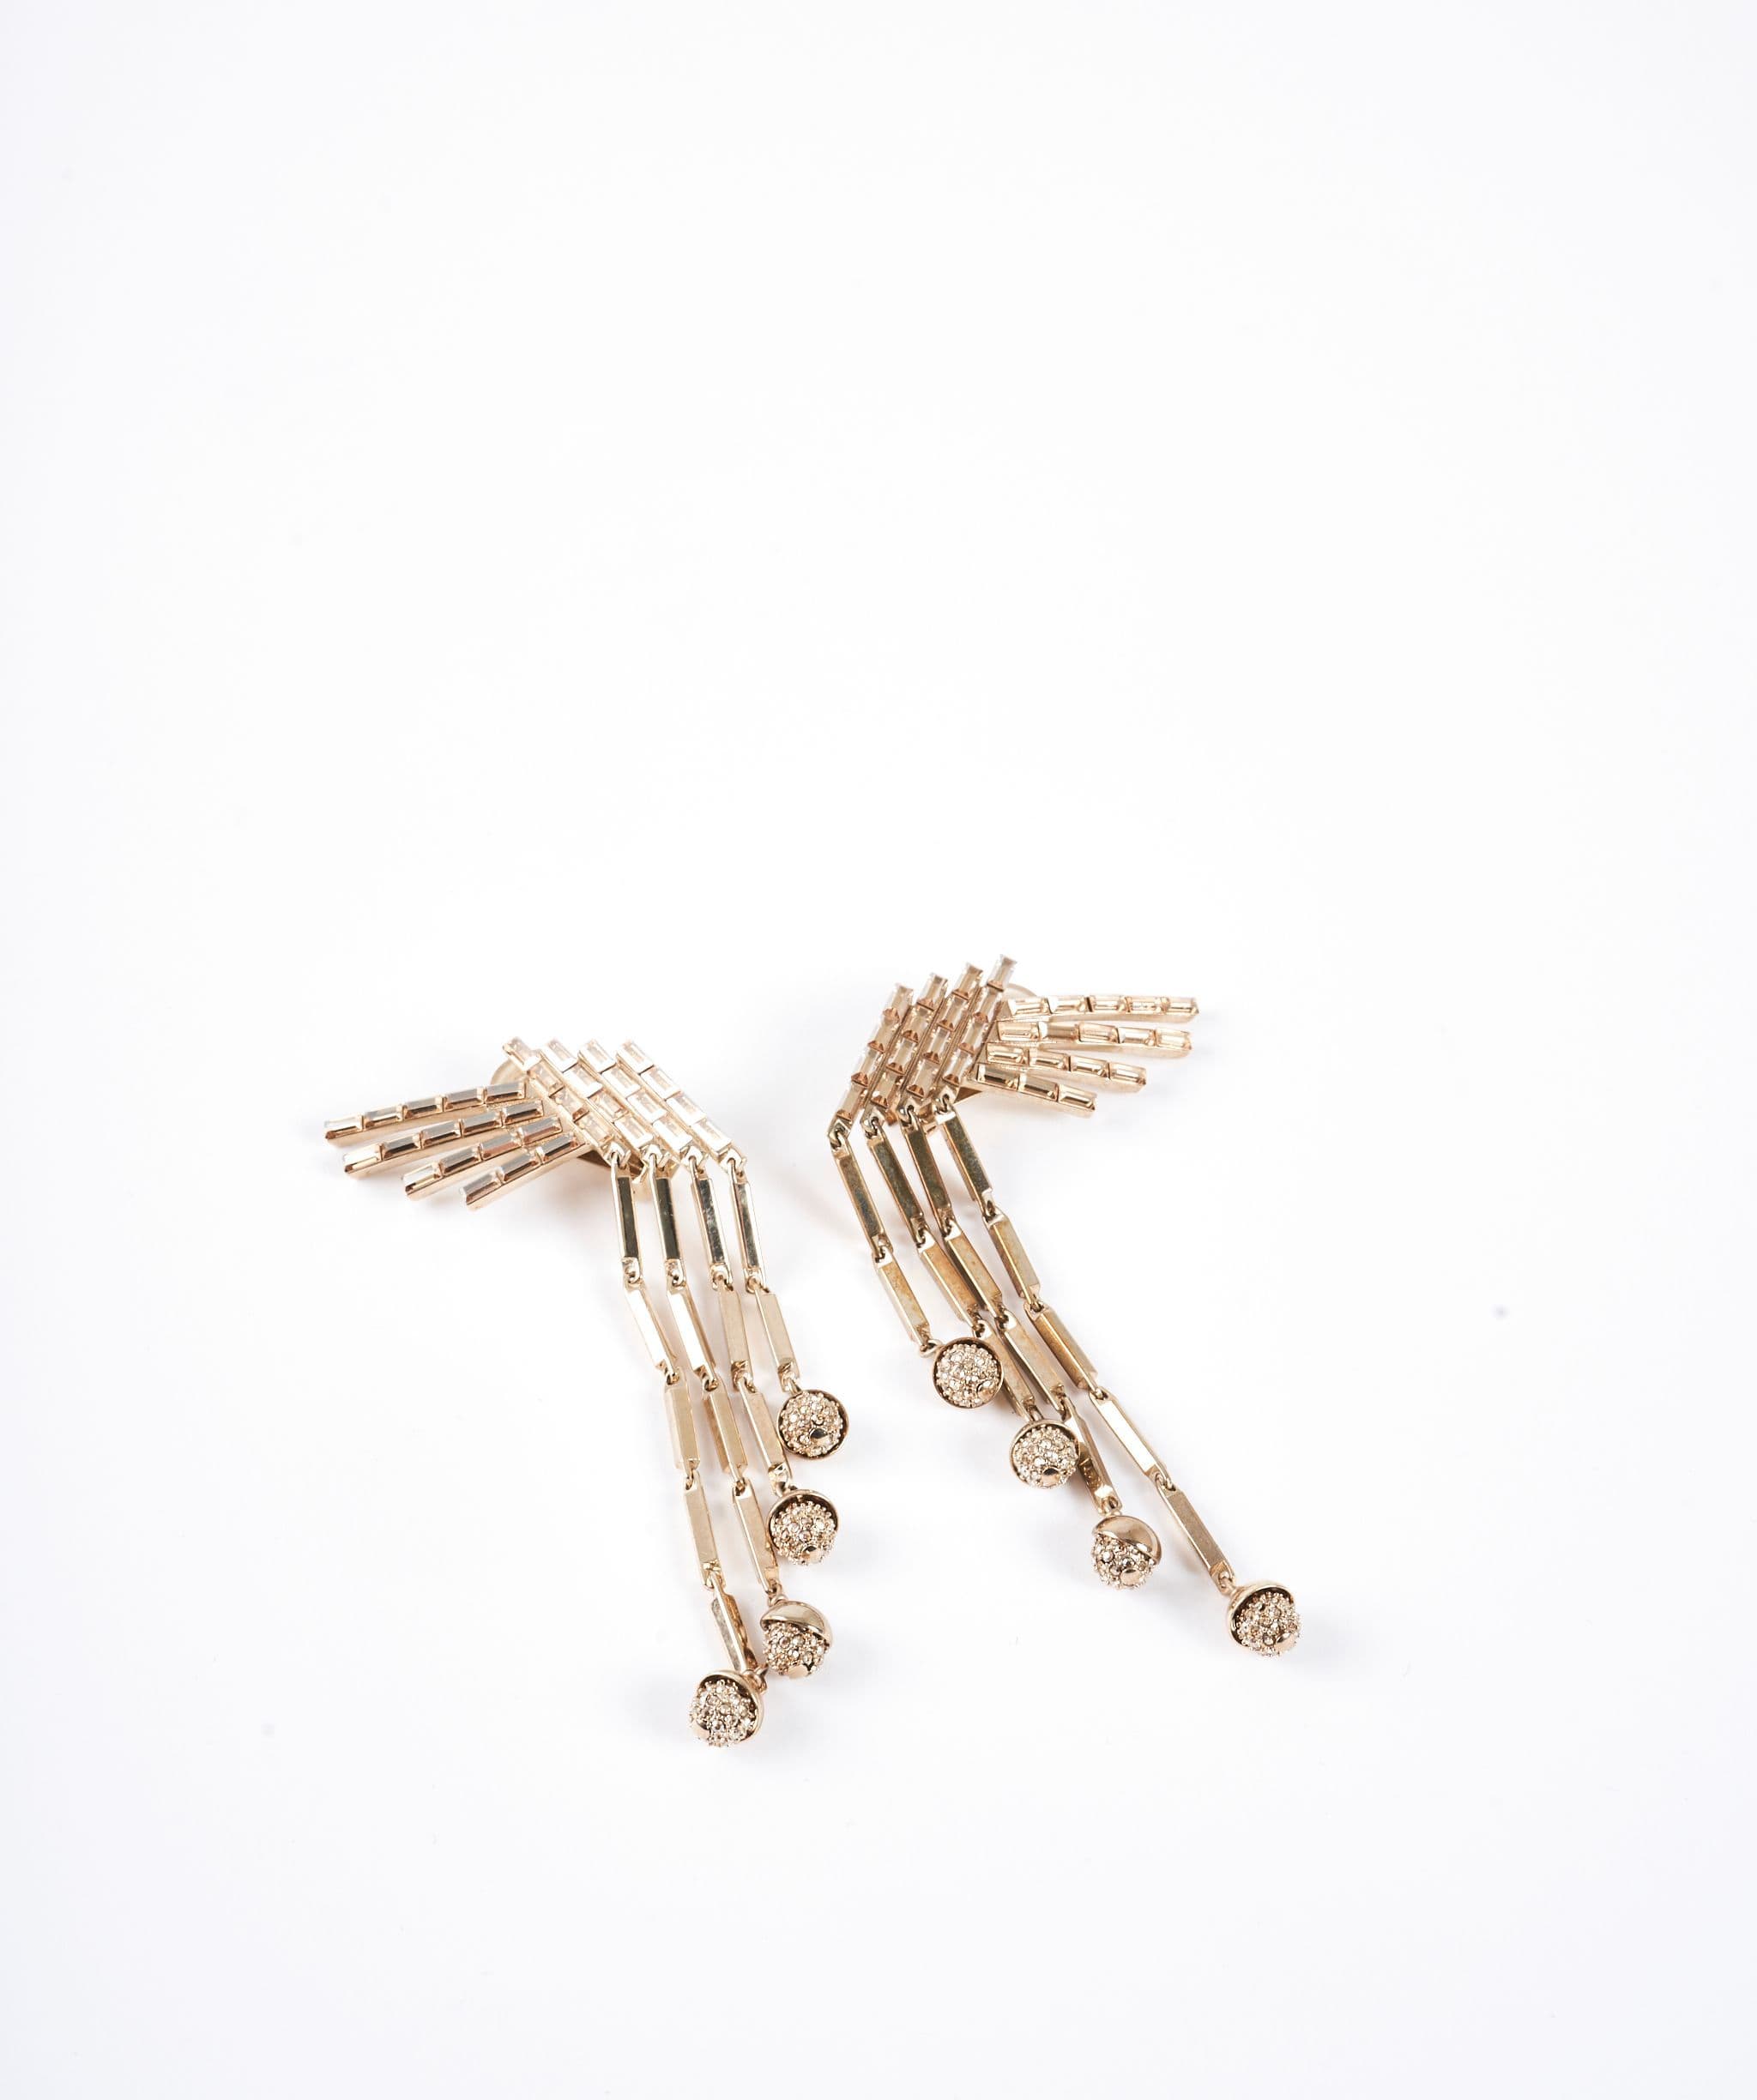 Christian Dior Christian Dior winged earrings